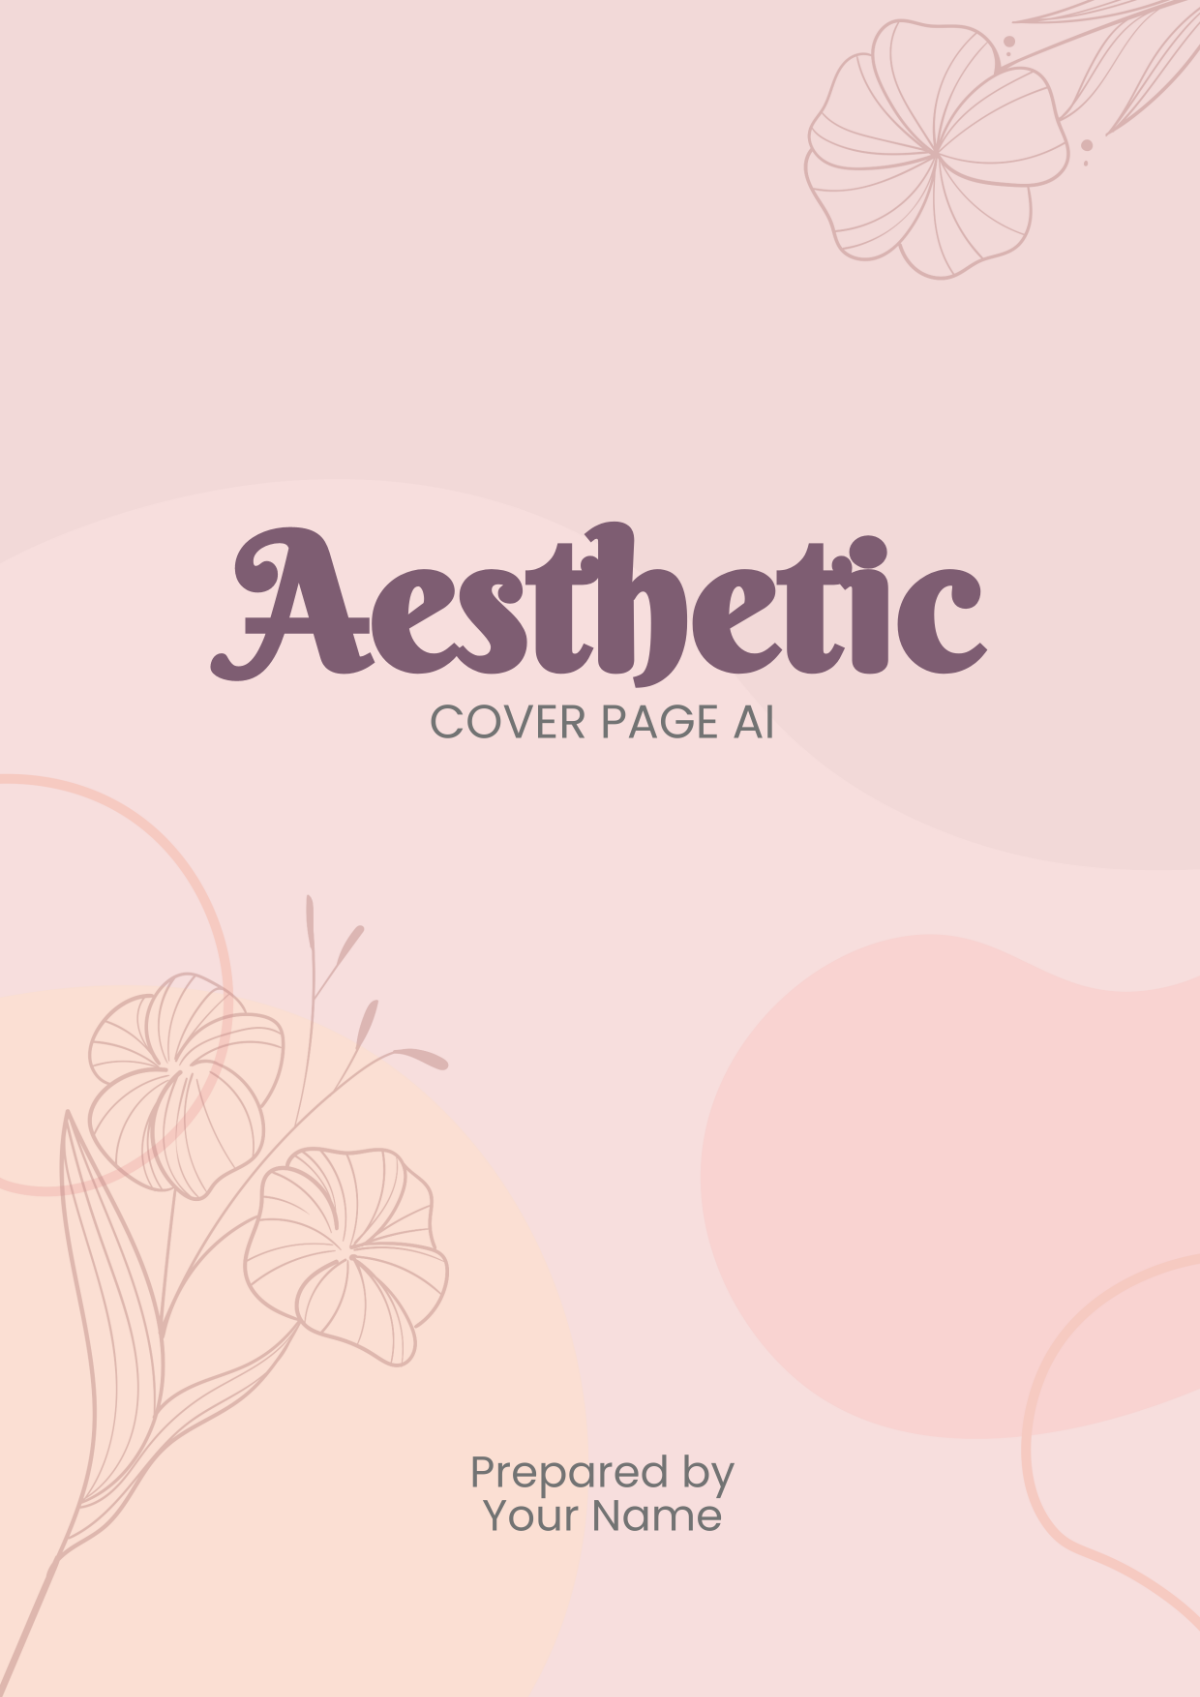 Aesthetic Cover Page AI Template